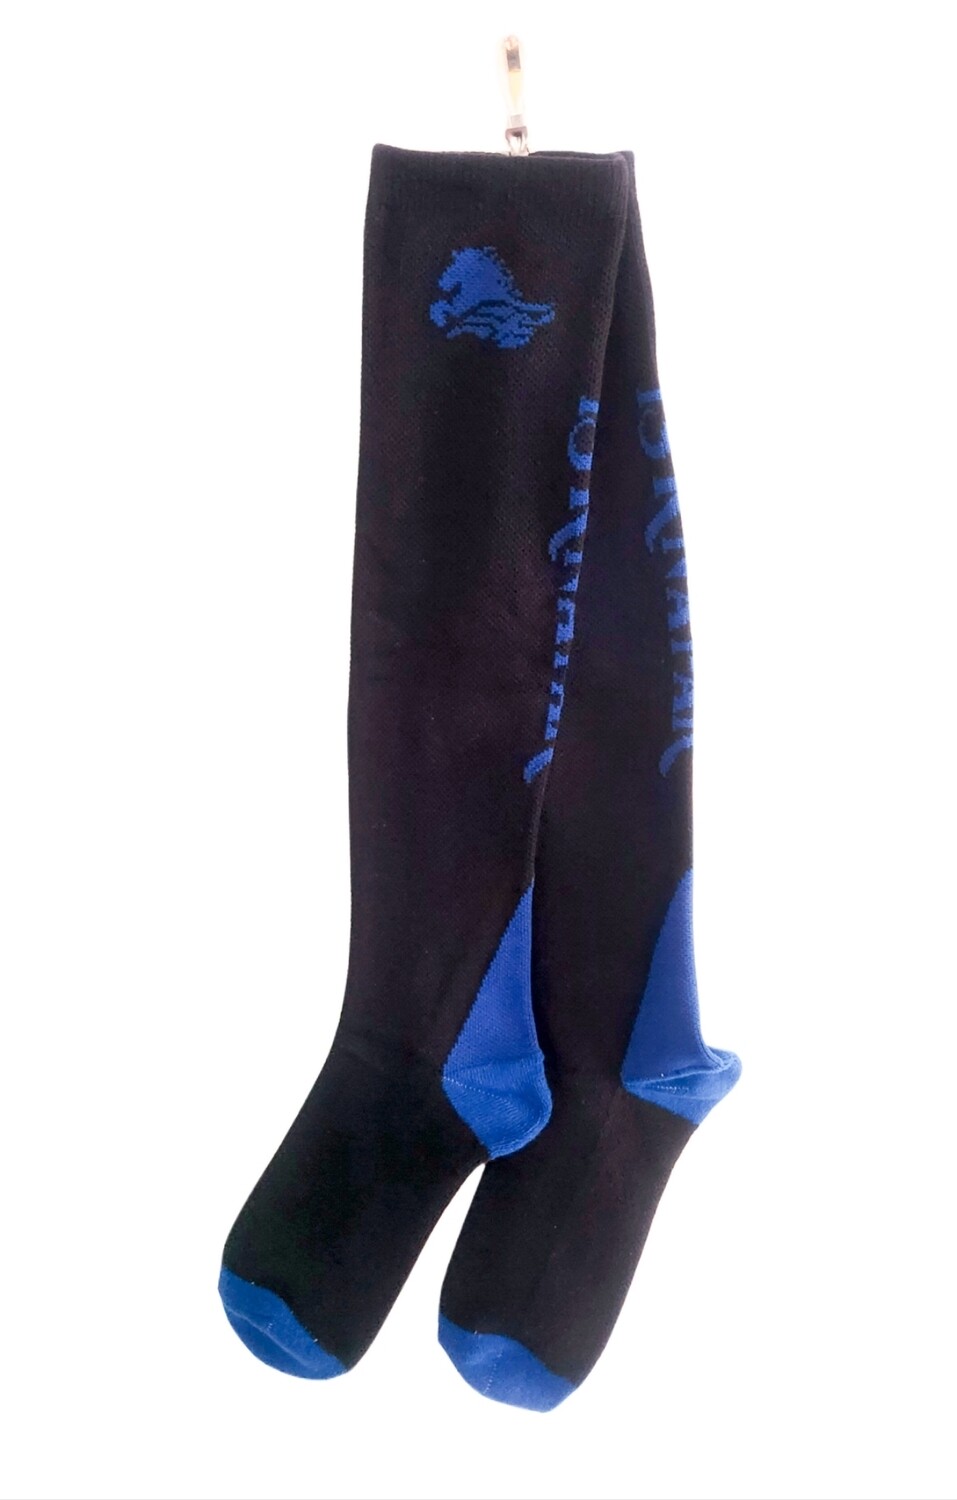 "JÆJA" - compression ridding socks class 2 by Ís Knapar - one size fits all (at least from US sizes 6 to 10)